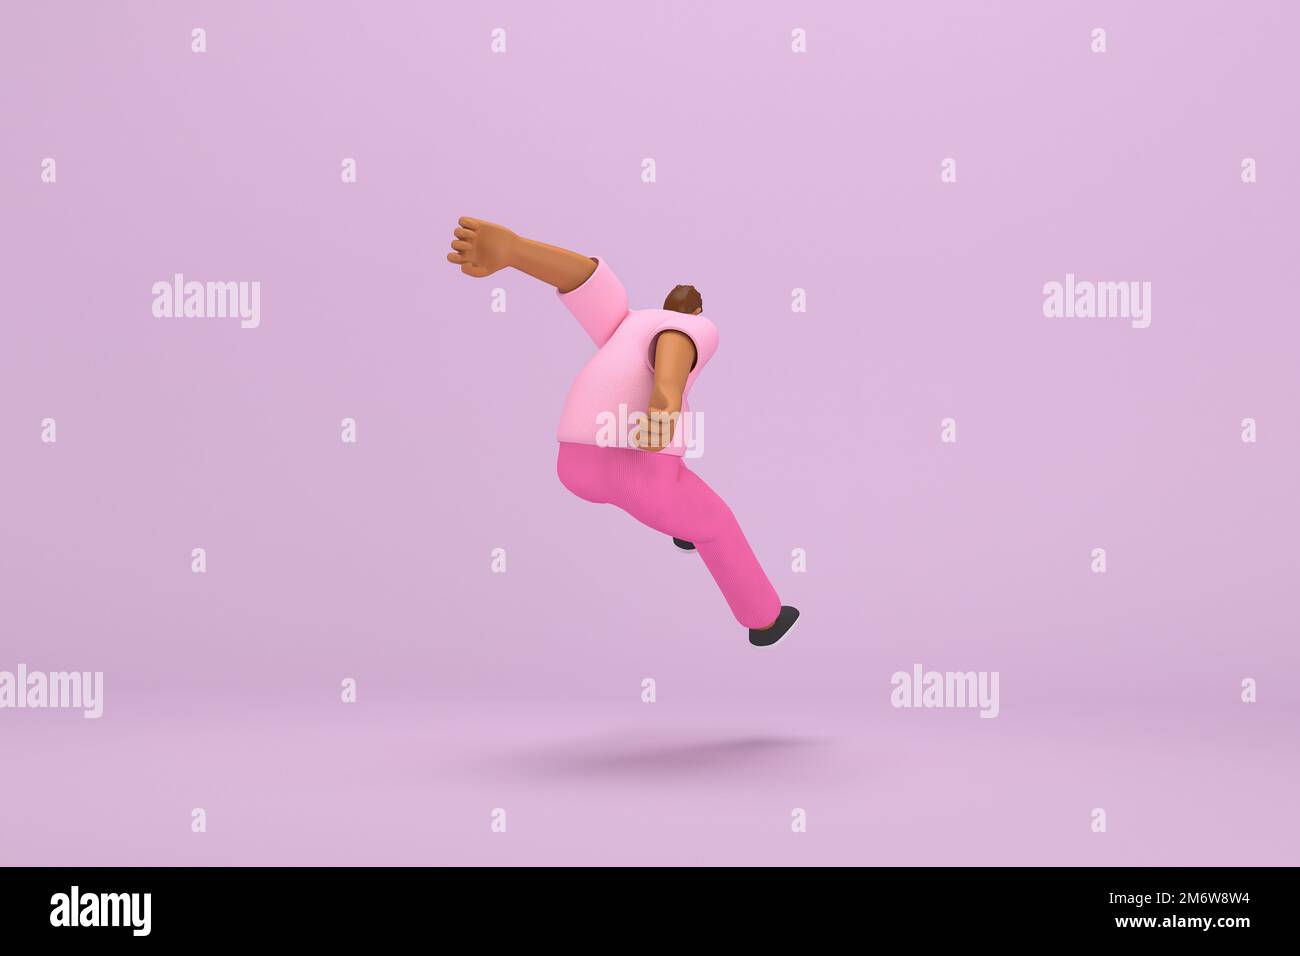 The black man with pink clothes.  He is jumping. 3d rendering of cartoon character in acting. Stock Photo